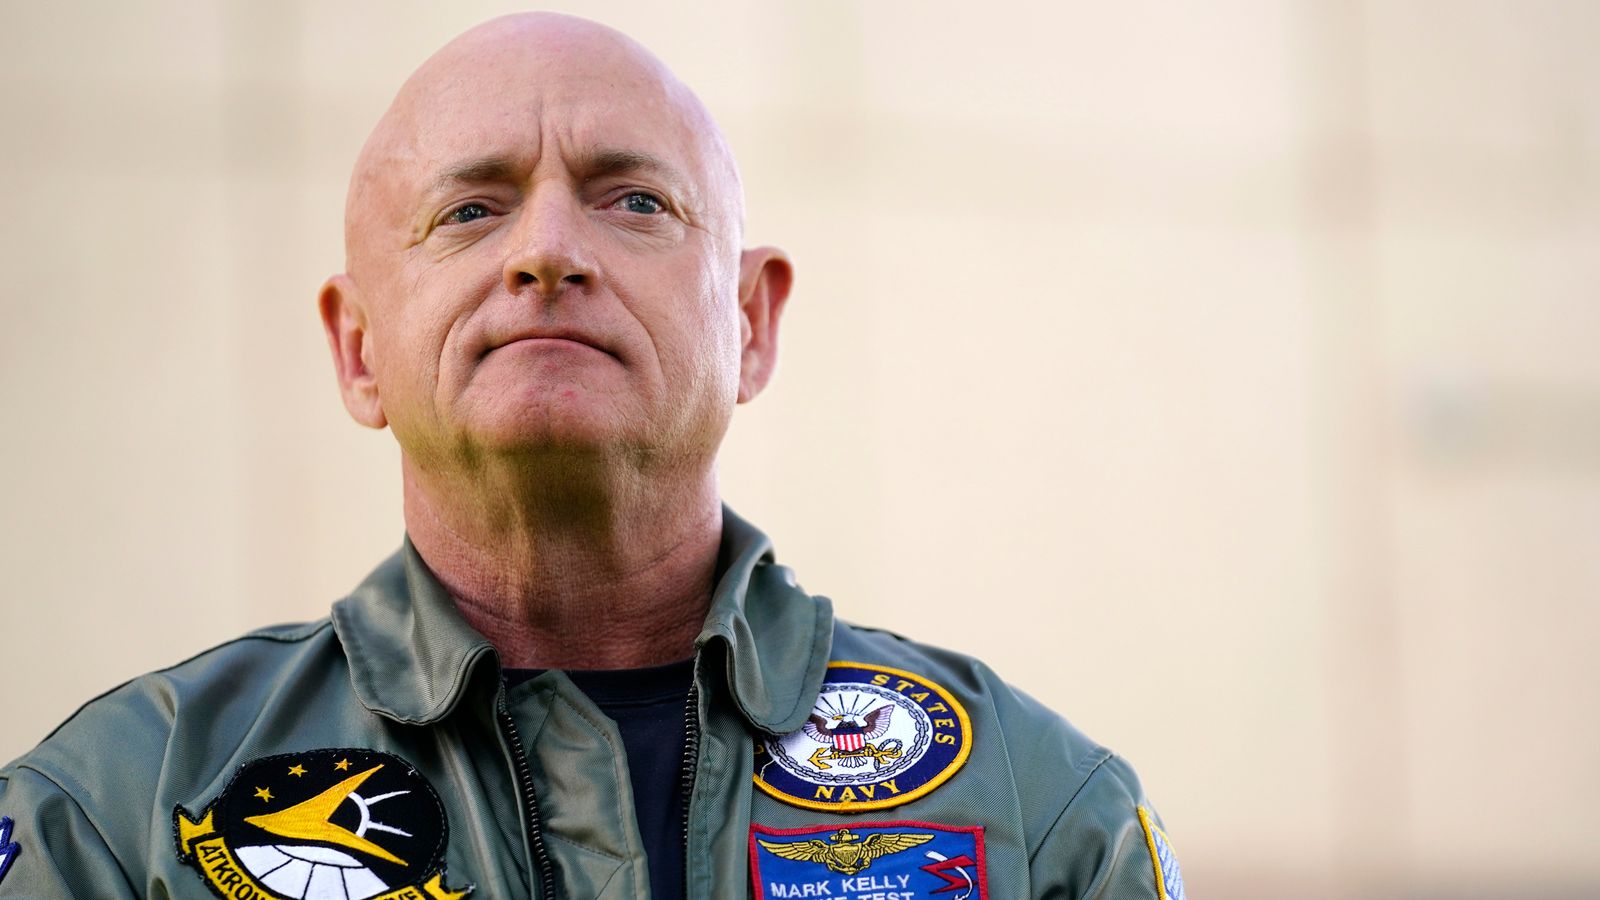 Democrat Mark Kelly claims victory in Arizona senate race, with overall control still in the balance